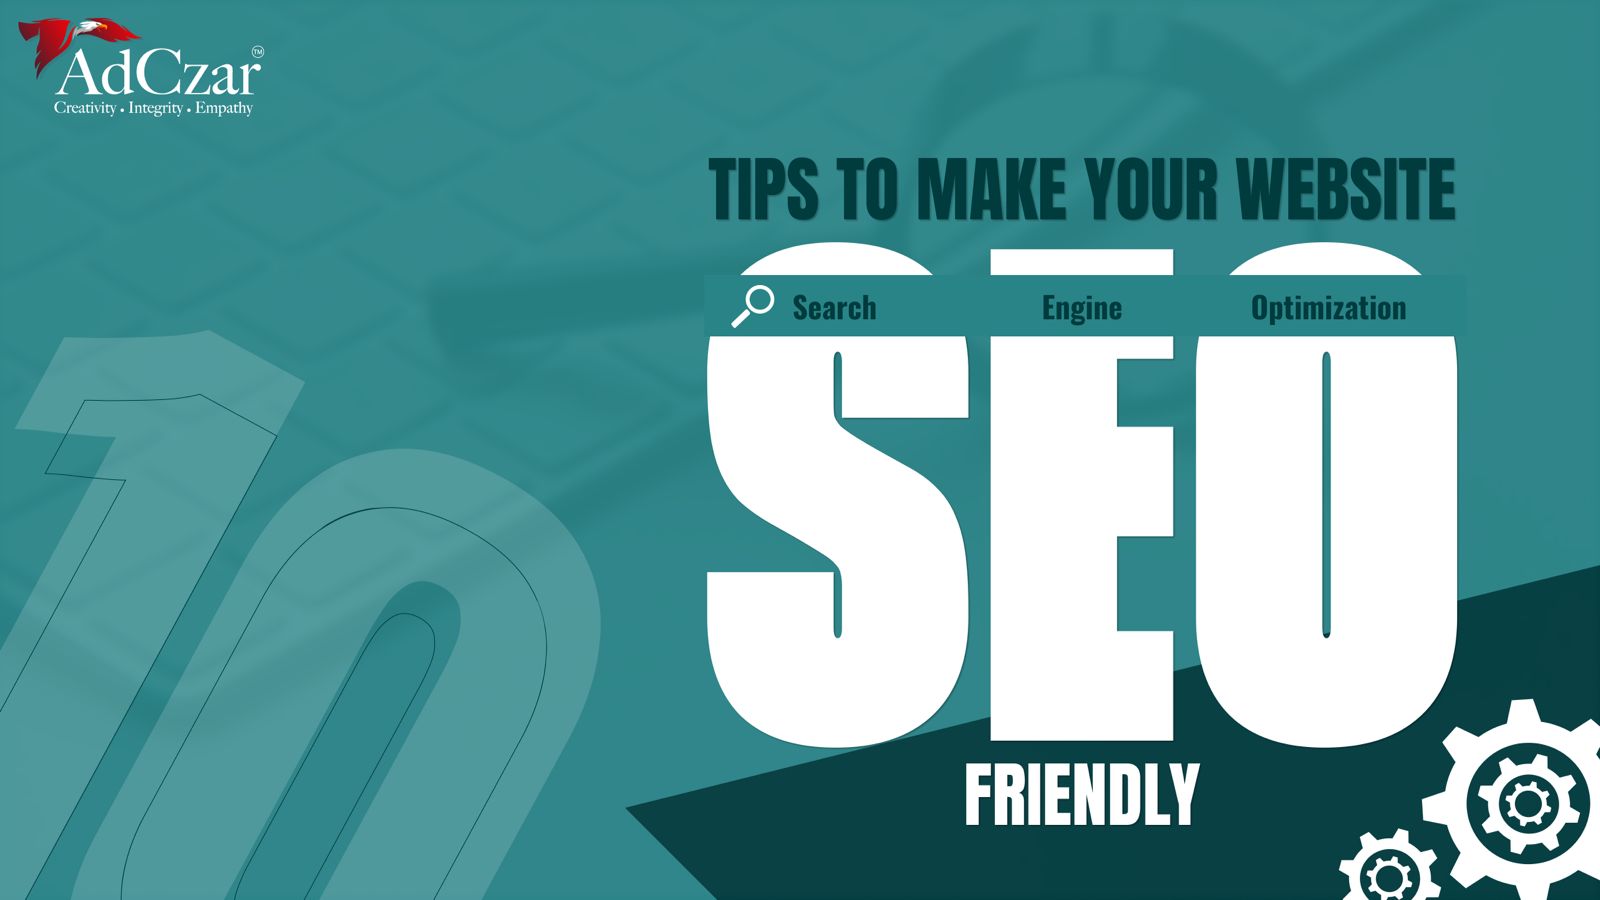 10 Tips to Make Your Website More SEO Friendly